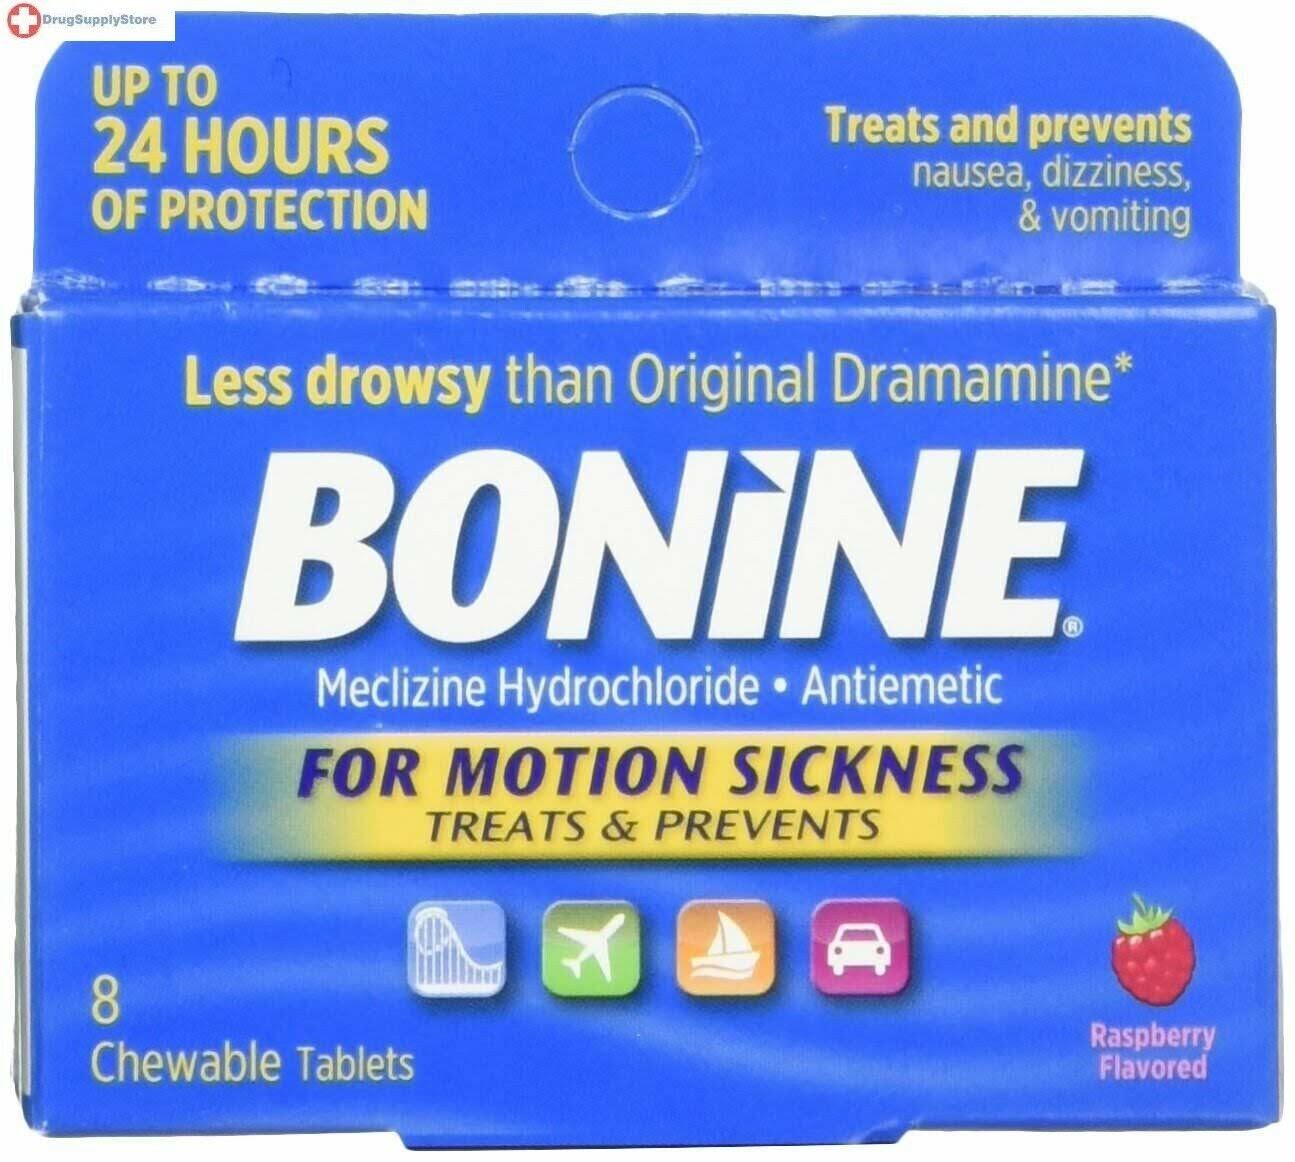 Bonide for Motion Sickness Chewable Tablets - Raspberry Flavored, 8pk